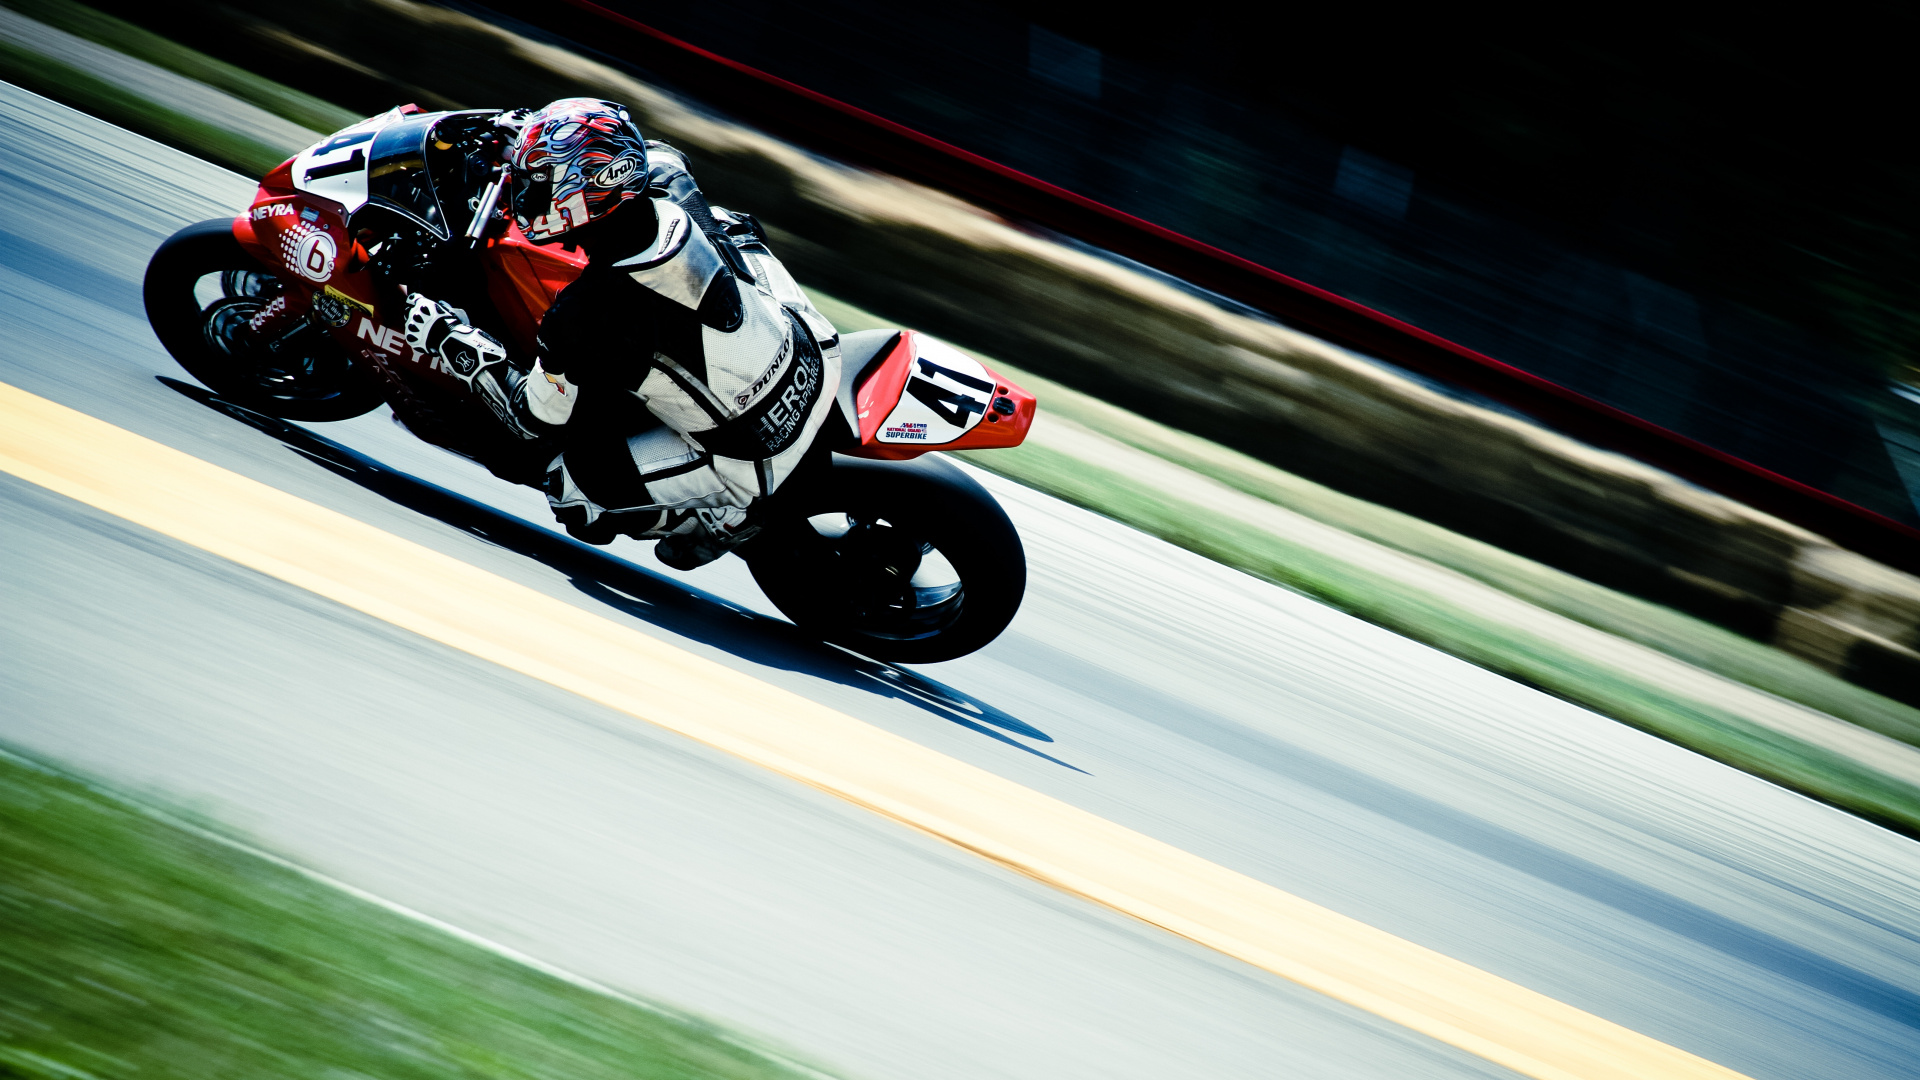 Man in Red and White Racing Suit Riding on Sports Bike. Wallpaper in 1920x1080 Resolution